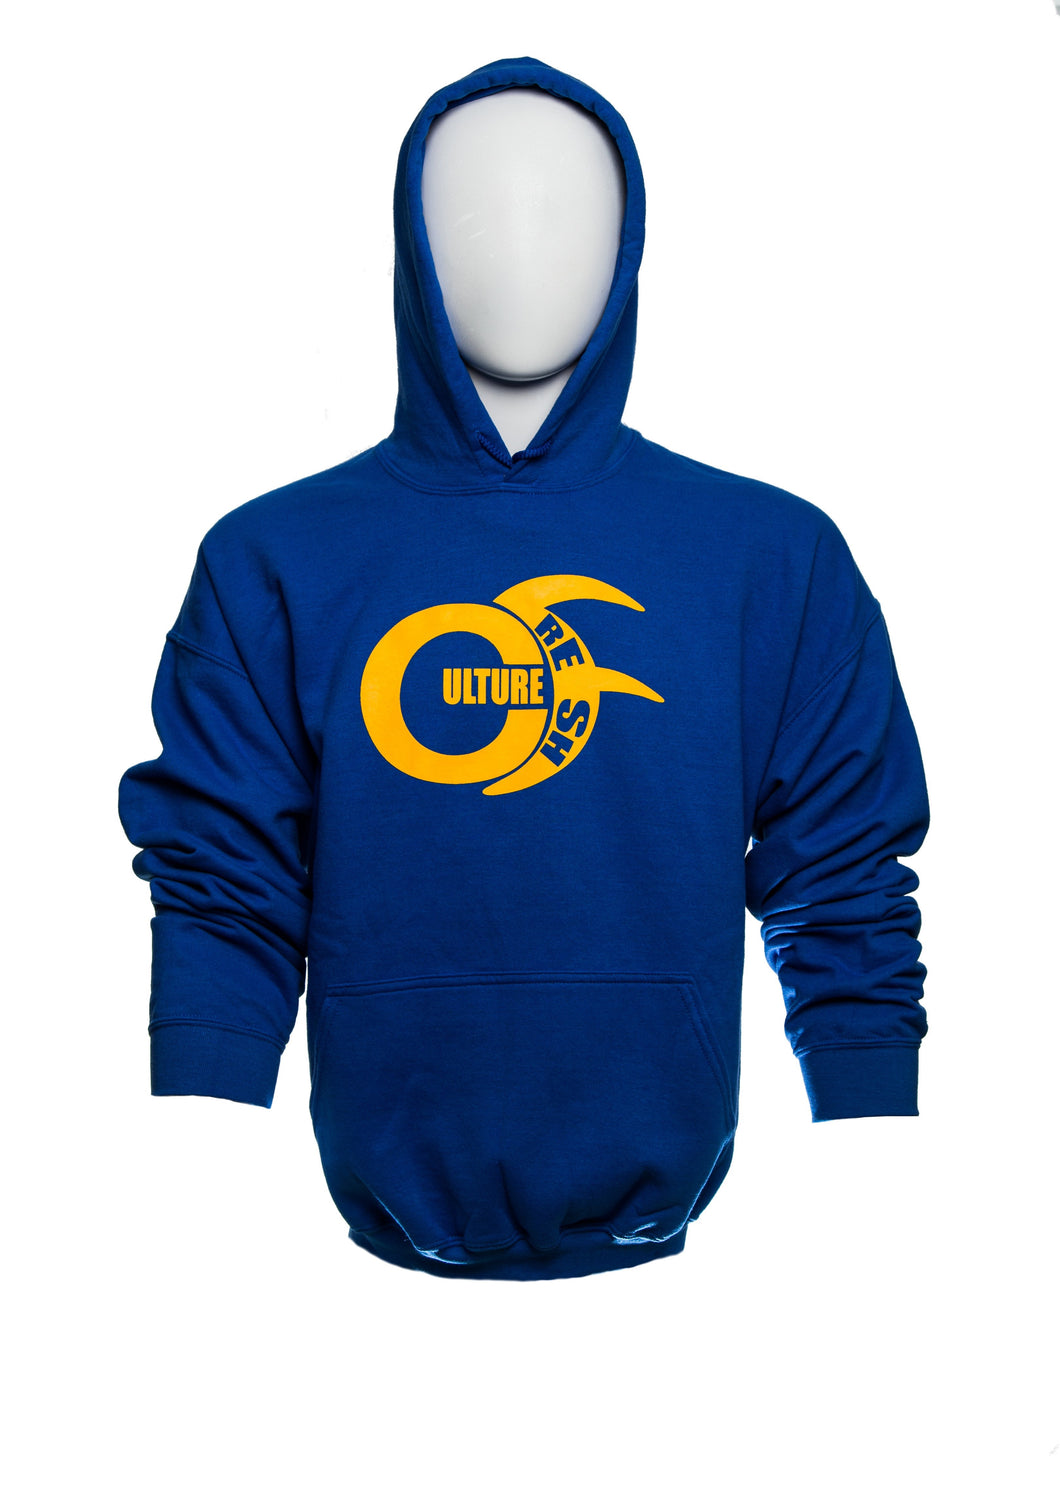 Fleece Hoody Long Sleeve Sweater, in Blue, Red and Black, with Large Gold Culturefresh Logo to Chest. Sizes 2XL, XL, L, M, S.